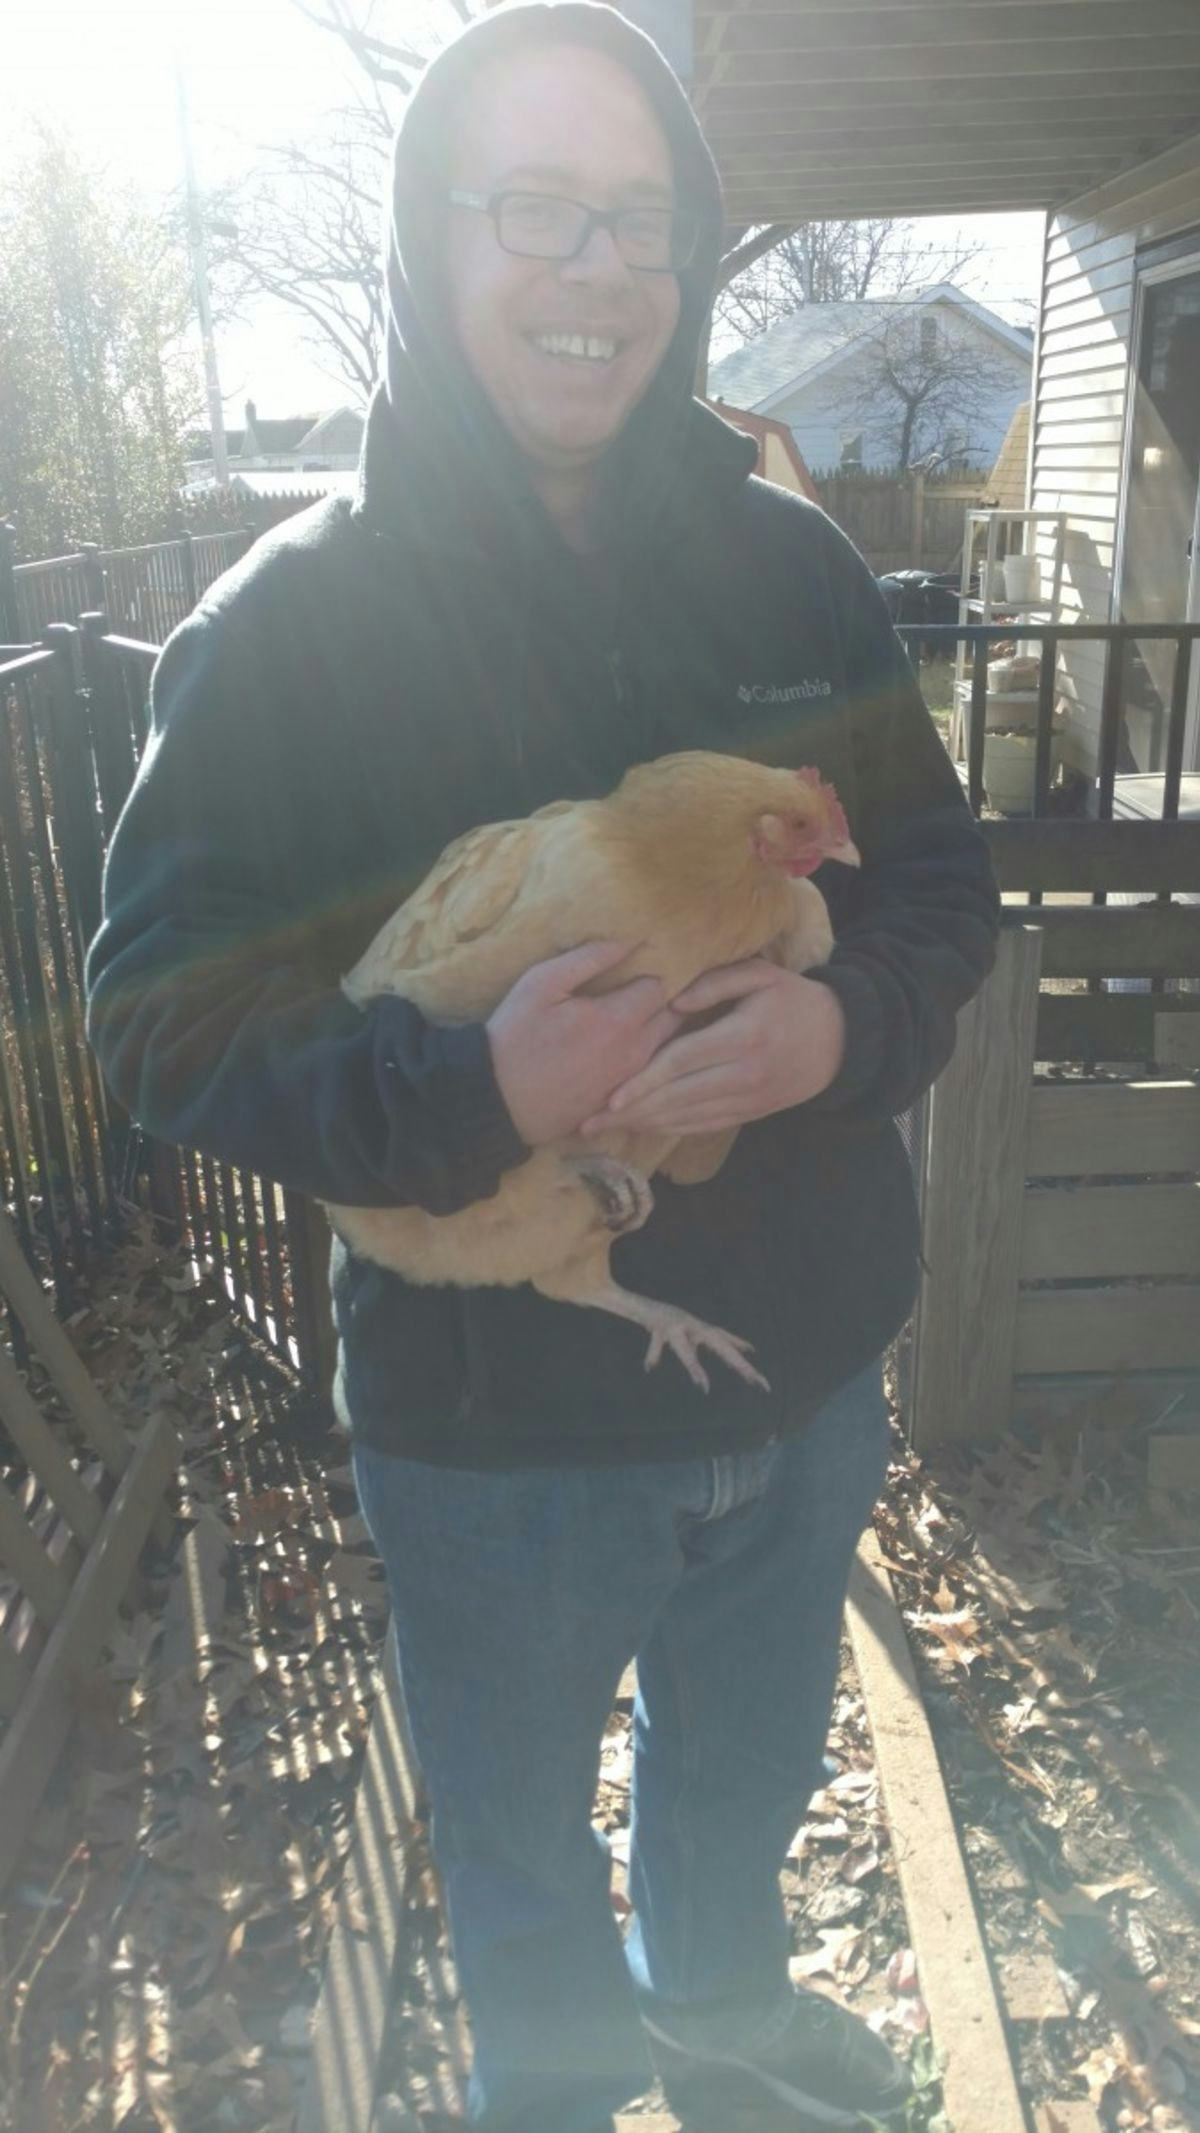 McKenna wasn't the only one who came around; this chicken took a liking to him, too